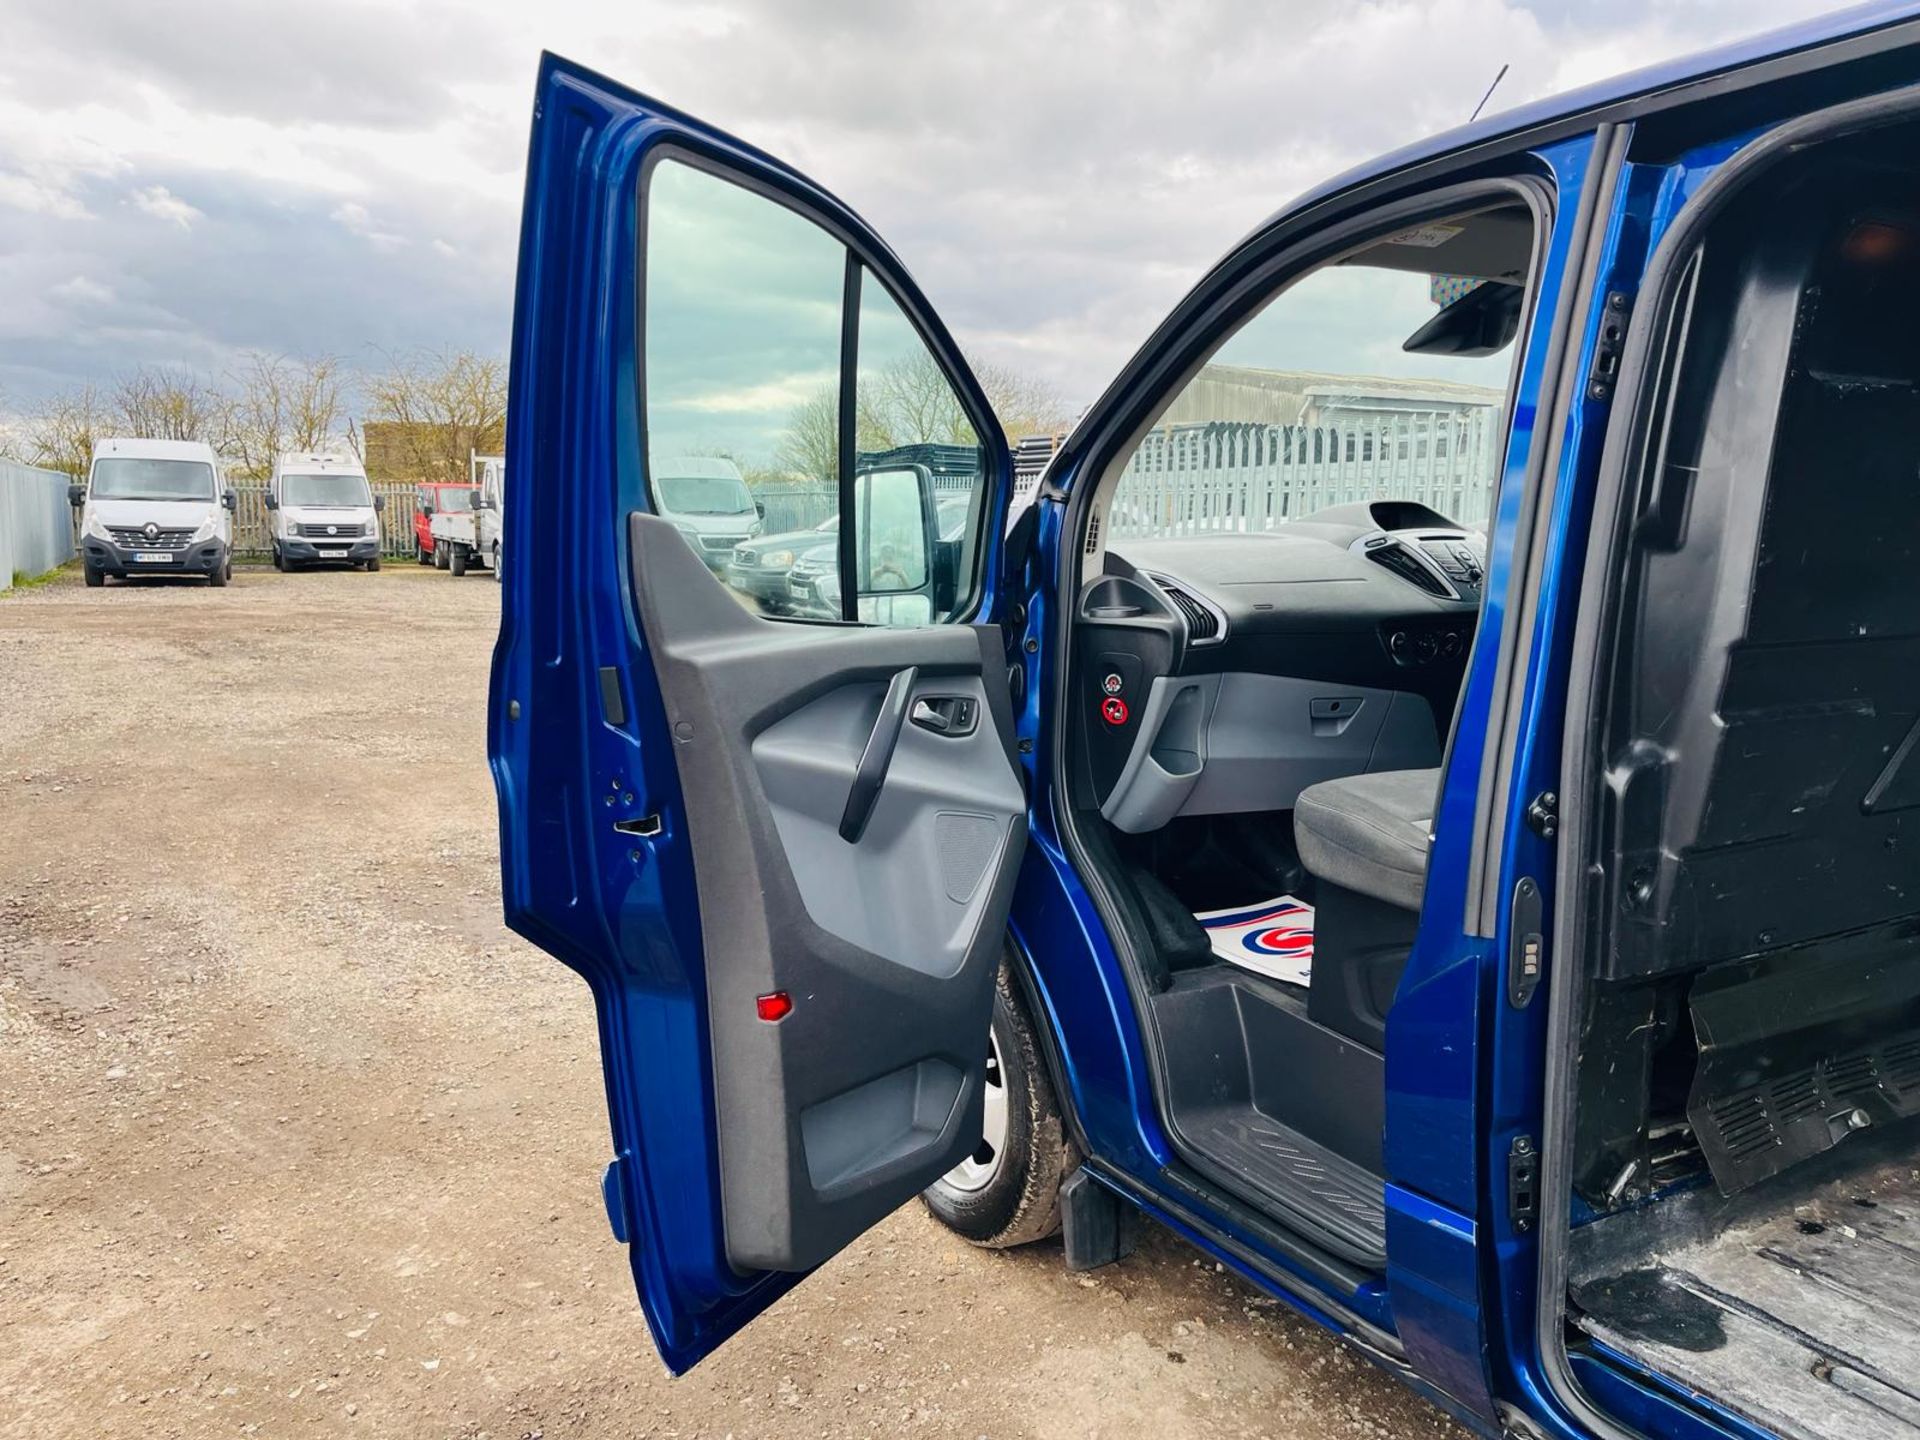 ** ON SALE ** Ford Transit Custom Limited 130 290 L3 H1 2.0 TDCI - ULEZ Compliant -Air Conditioning - Image 22 of 28